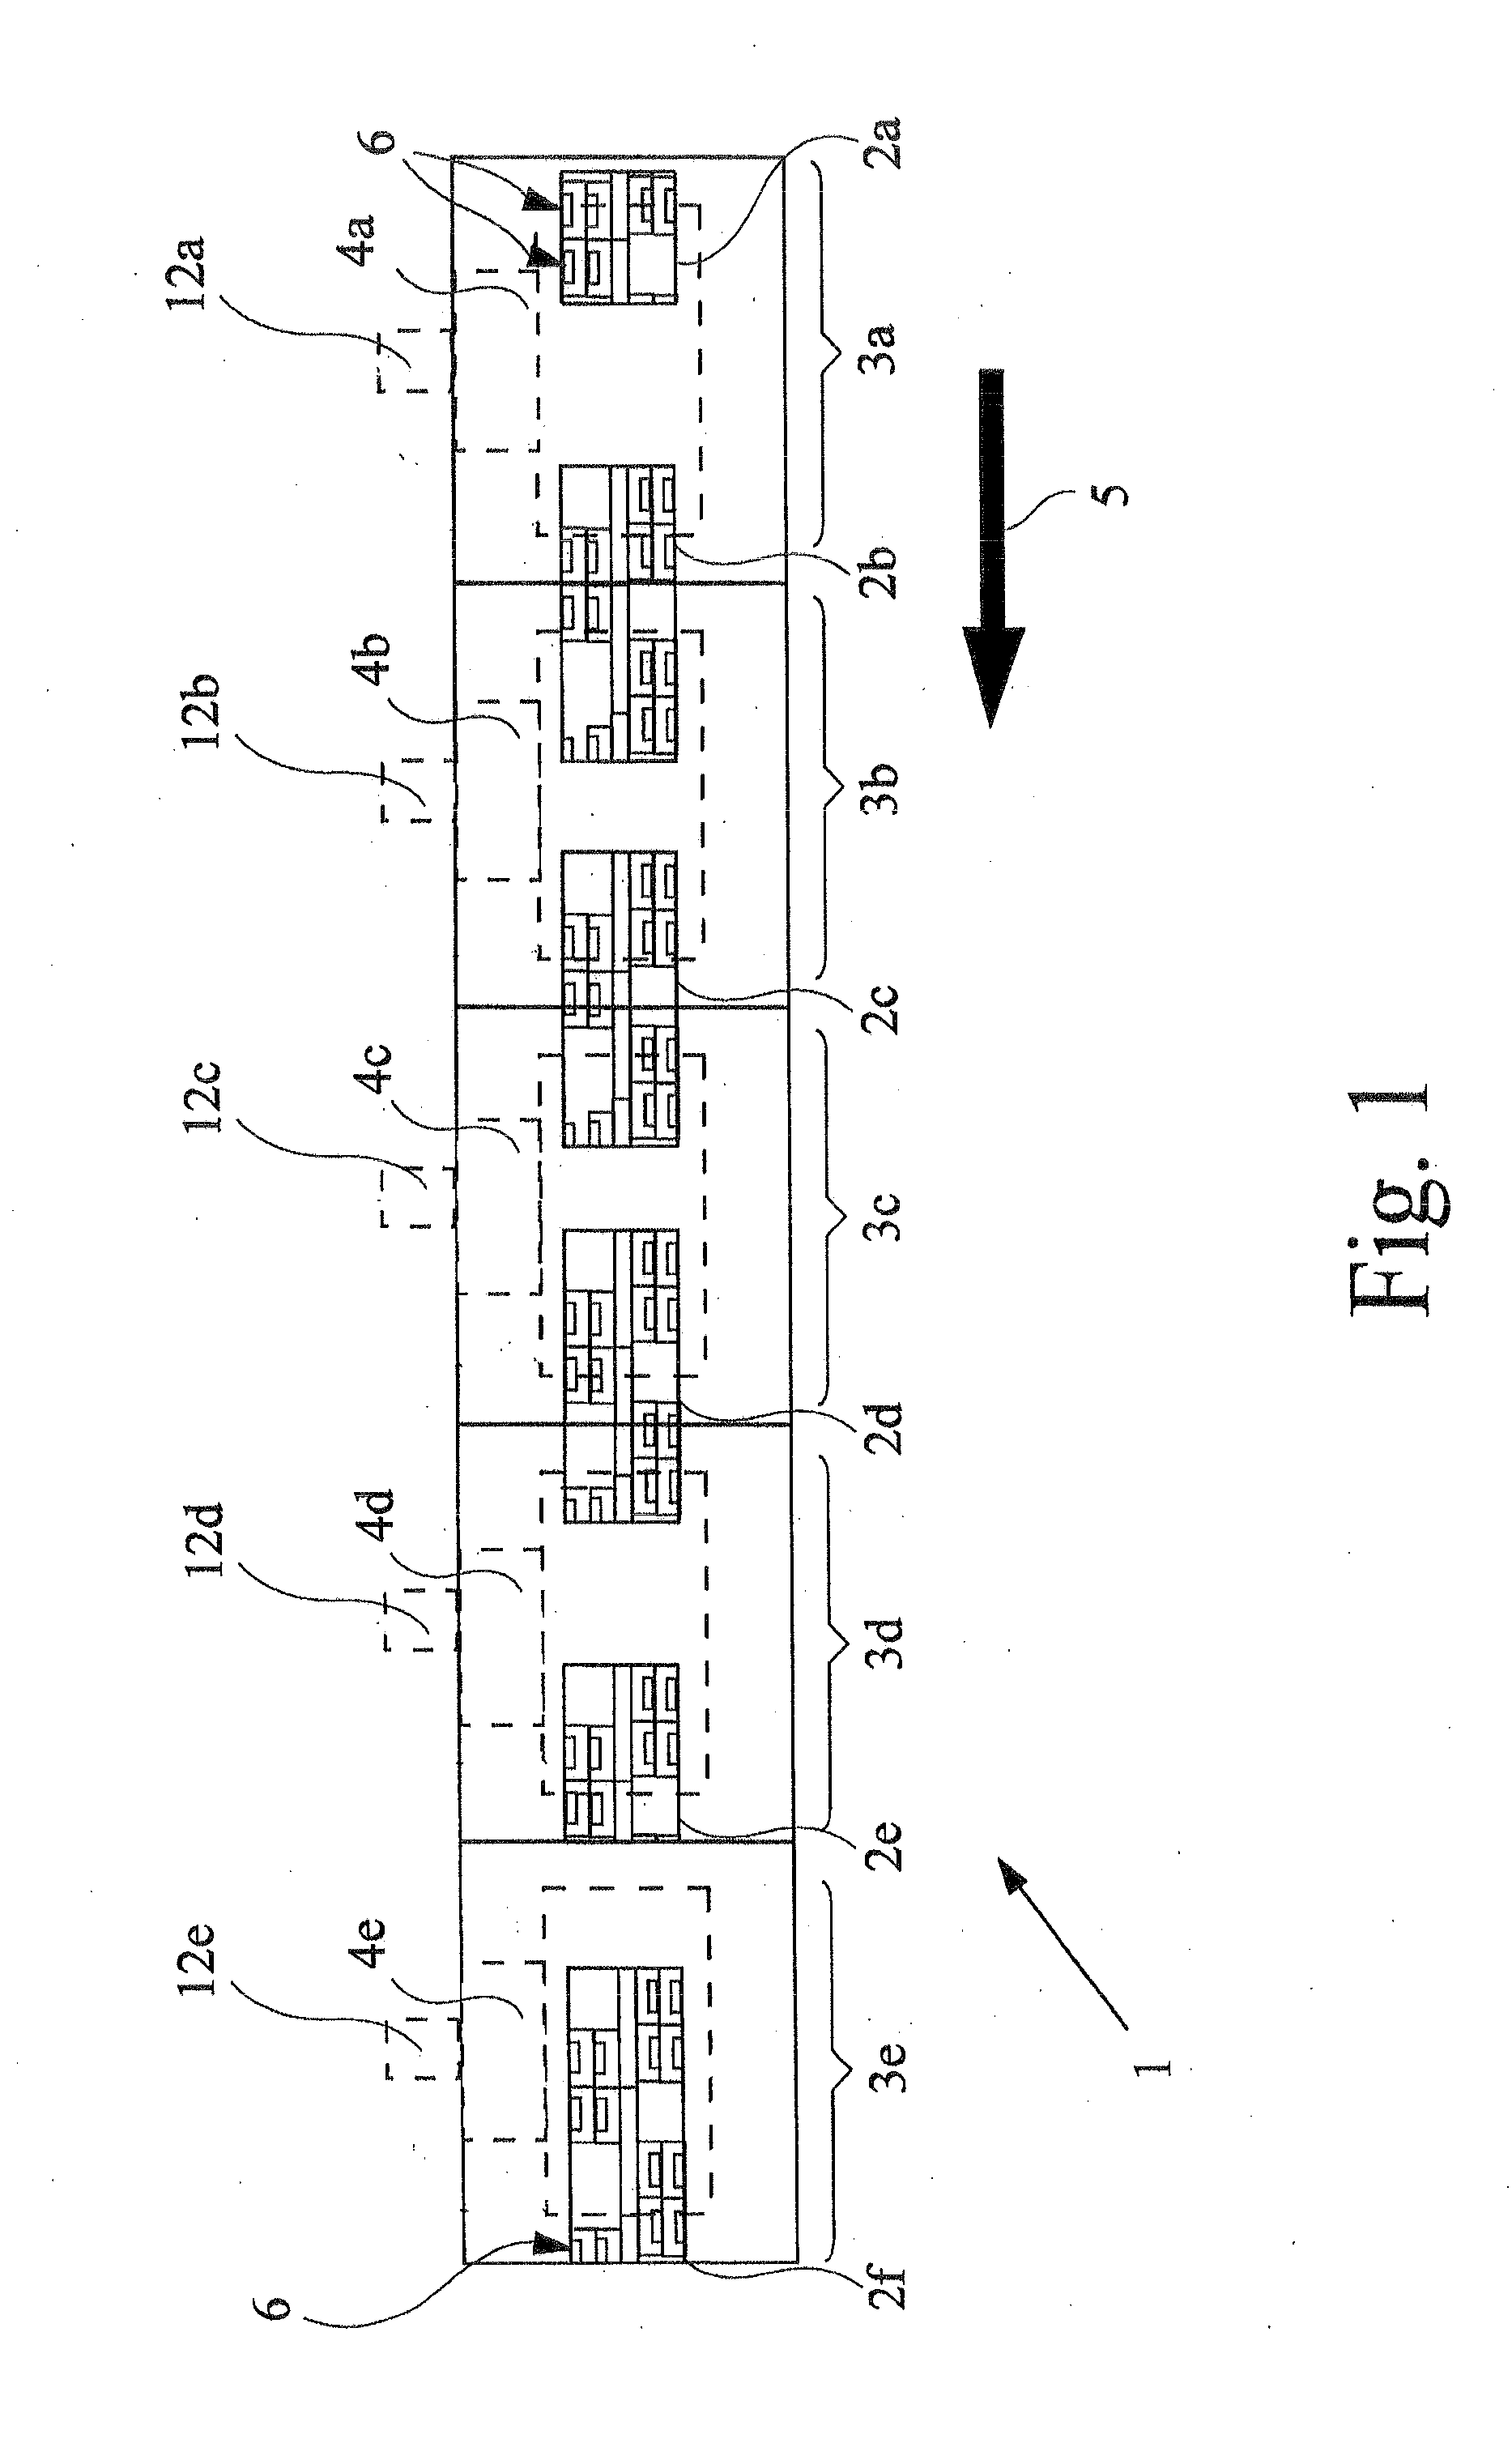 Method for offline programming of an nc-controlled manipulator